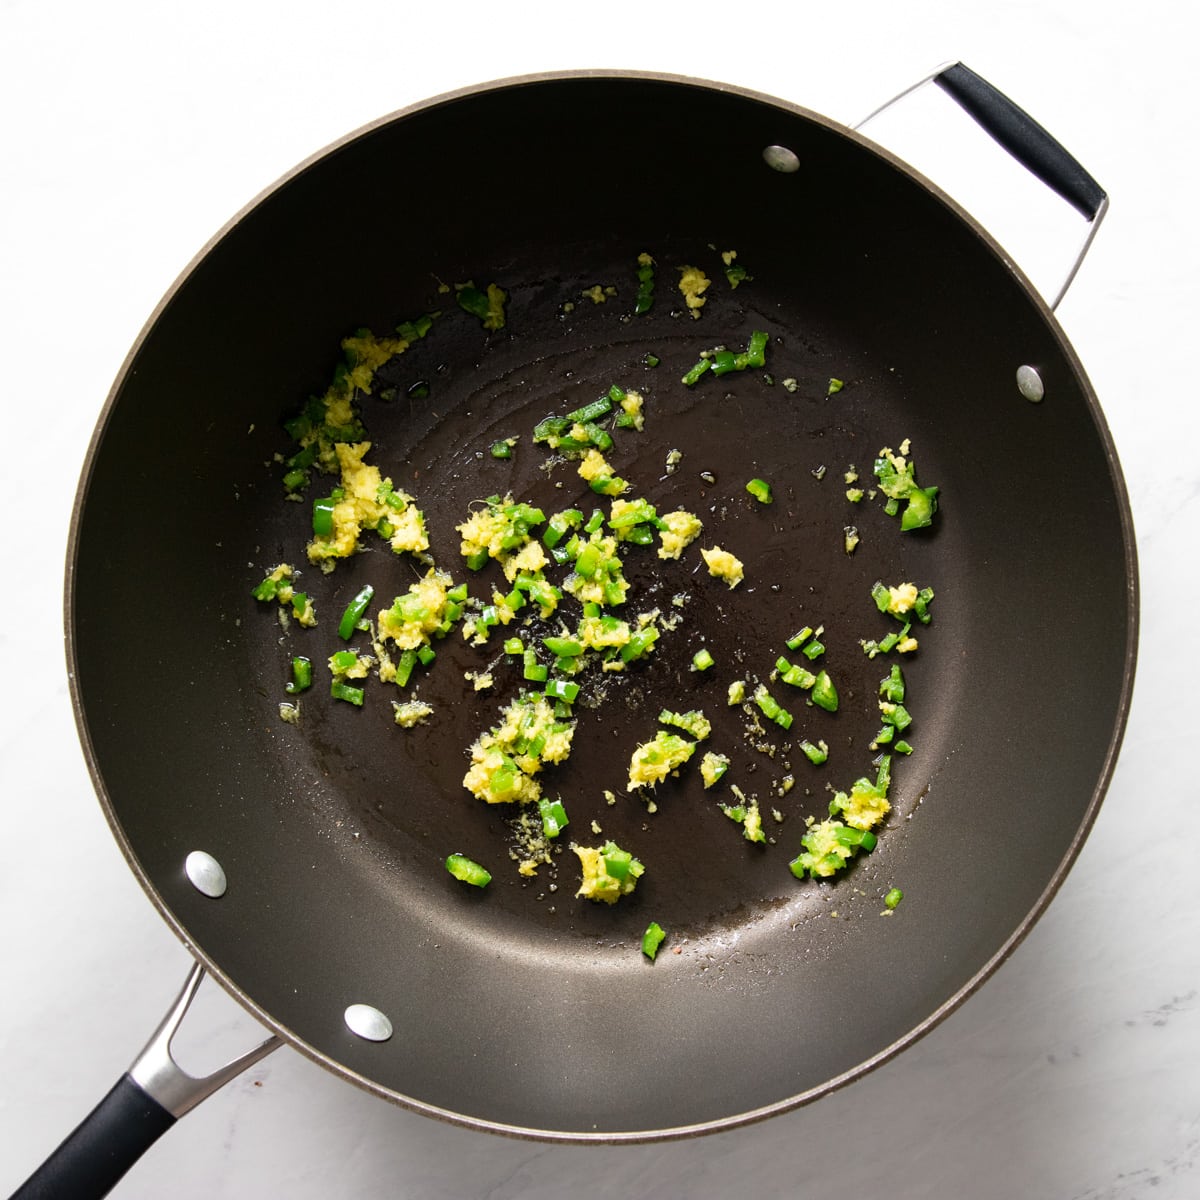 A skillet containing finely-chopped jalapeño and finely-grated fresh ginger sautéing in some garlic-infused oil.